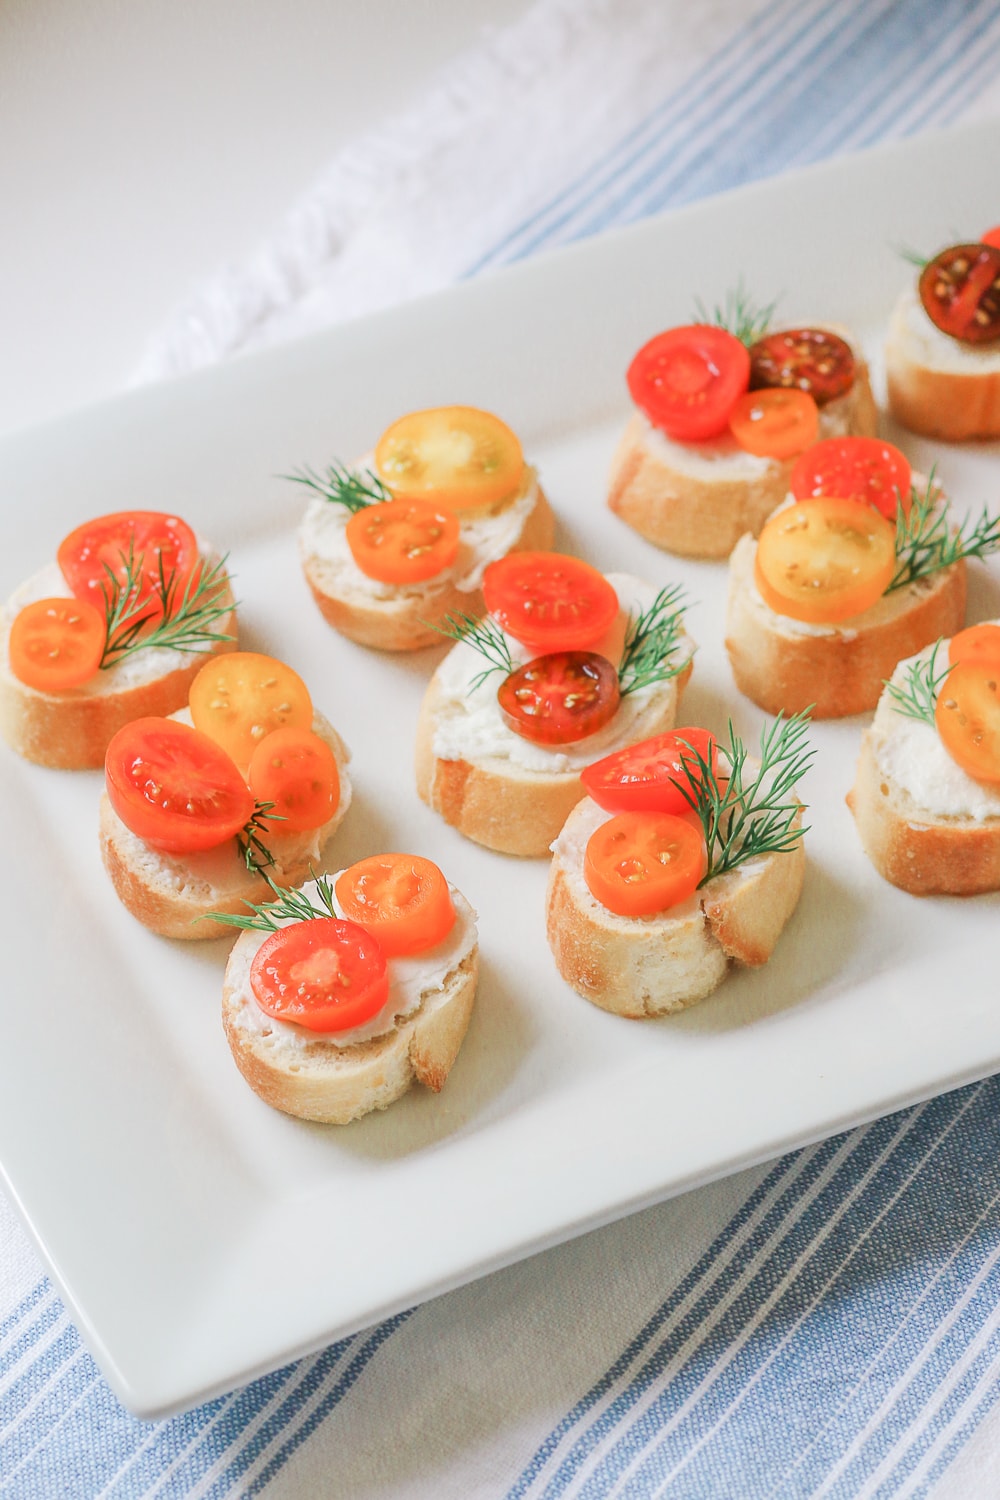 Southern lifestyle blogger Stephanie Ziajka shares an easy tomato and goat cheese appetizer on Diary of a Debutante